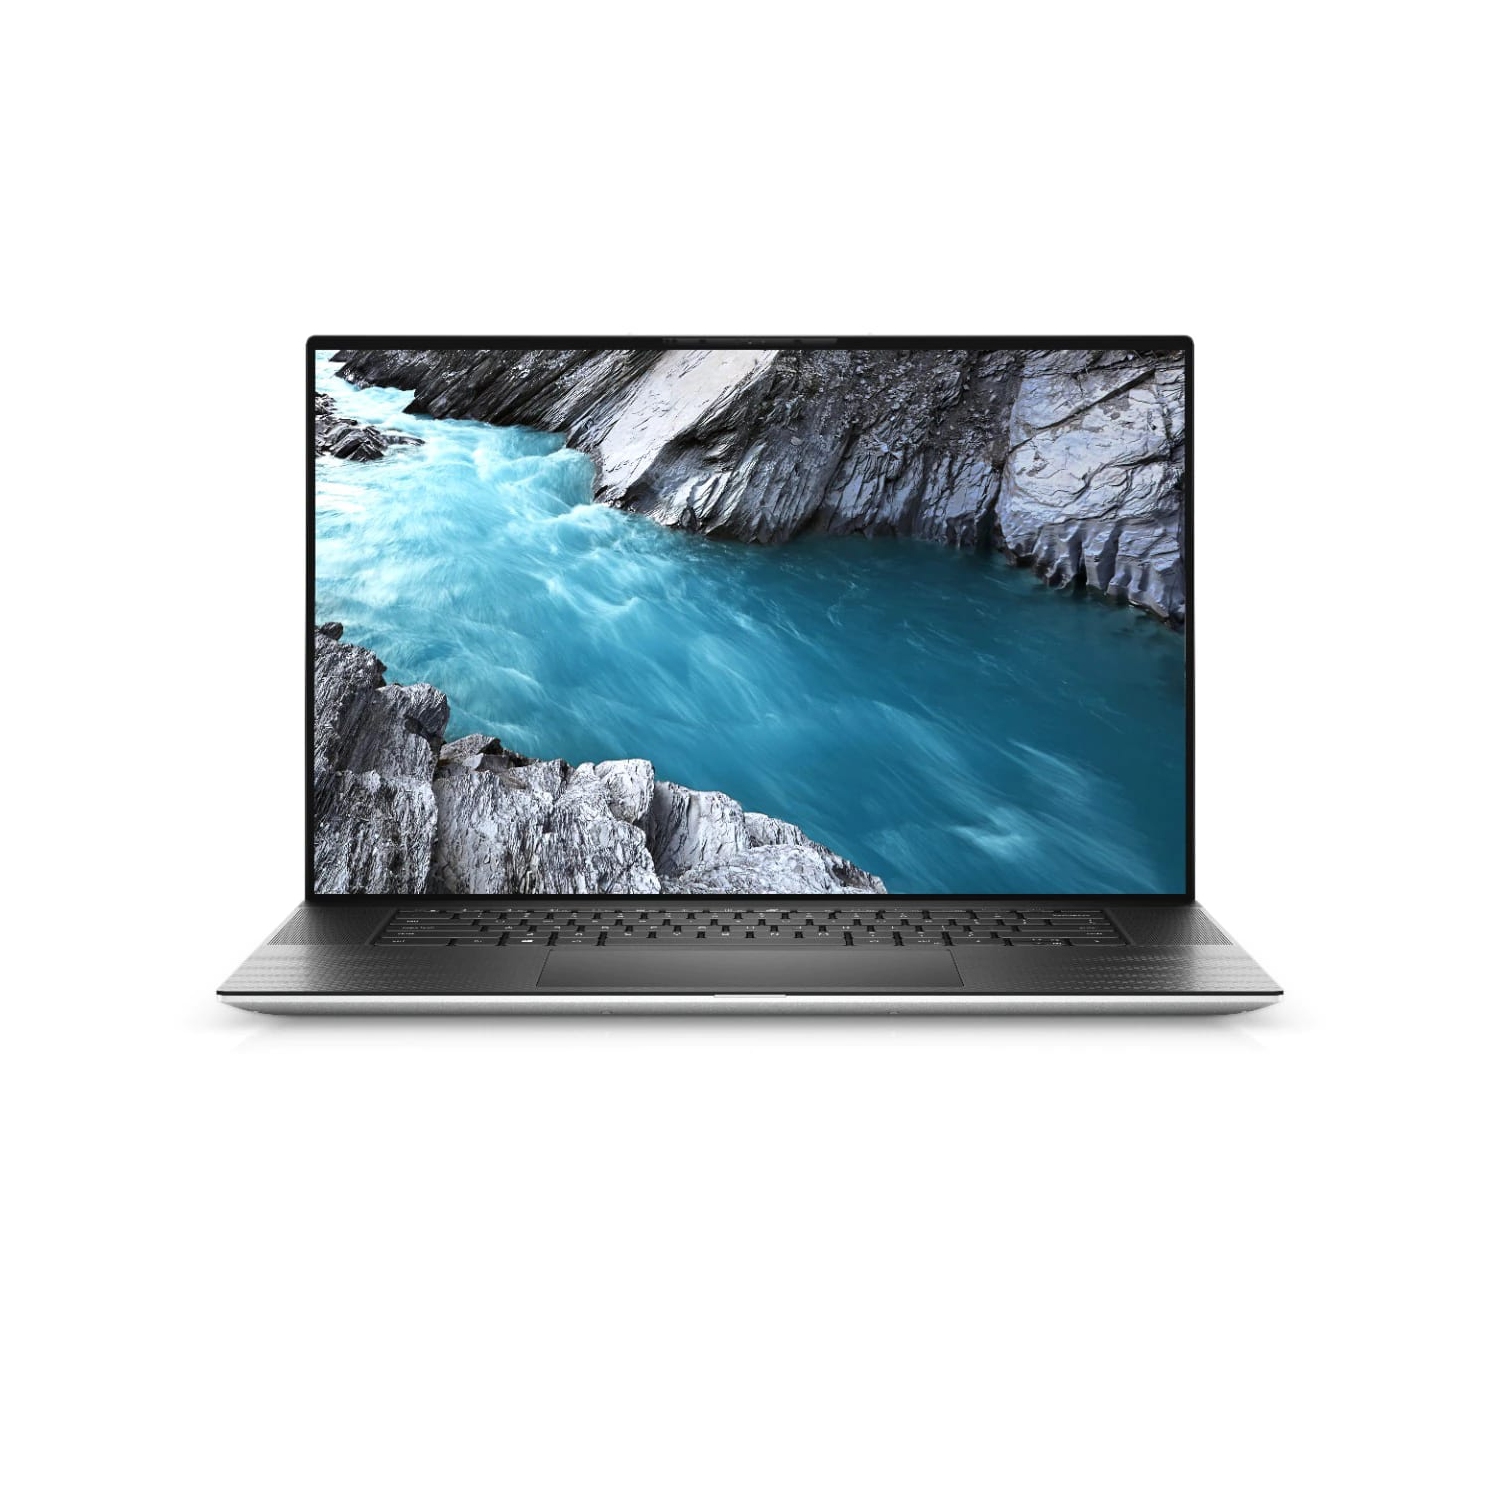 Refurbished (Excellent) - Dell XPS 17 9700 Laptop (2020) | 17" 4K Touch | Core i9 - 2TB SSD - 64GB RAM - RTX 2060 | 8 Cores @ 5.3 GHz - 10th Gen CPU Certified Refurbished